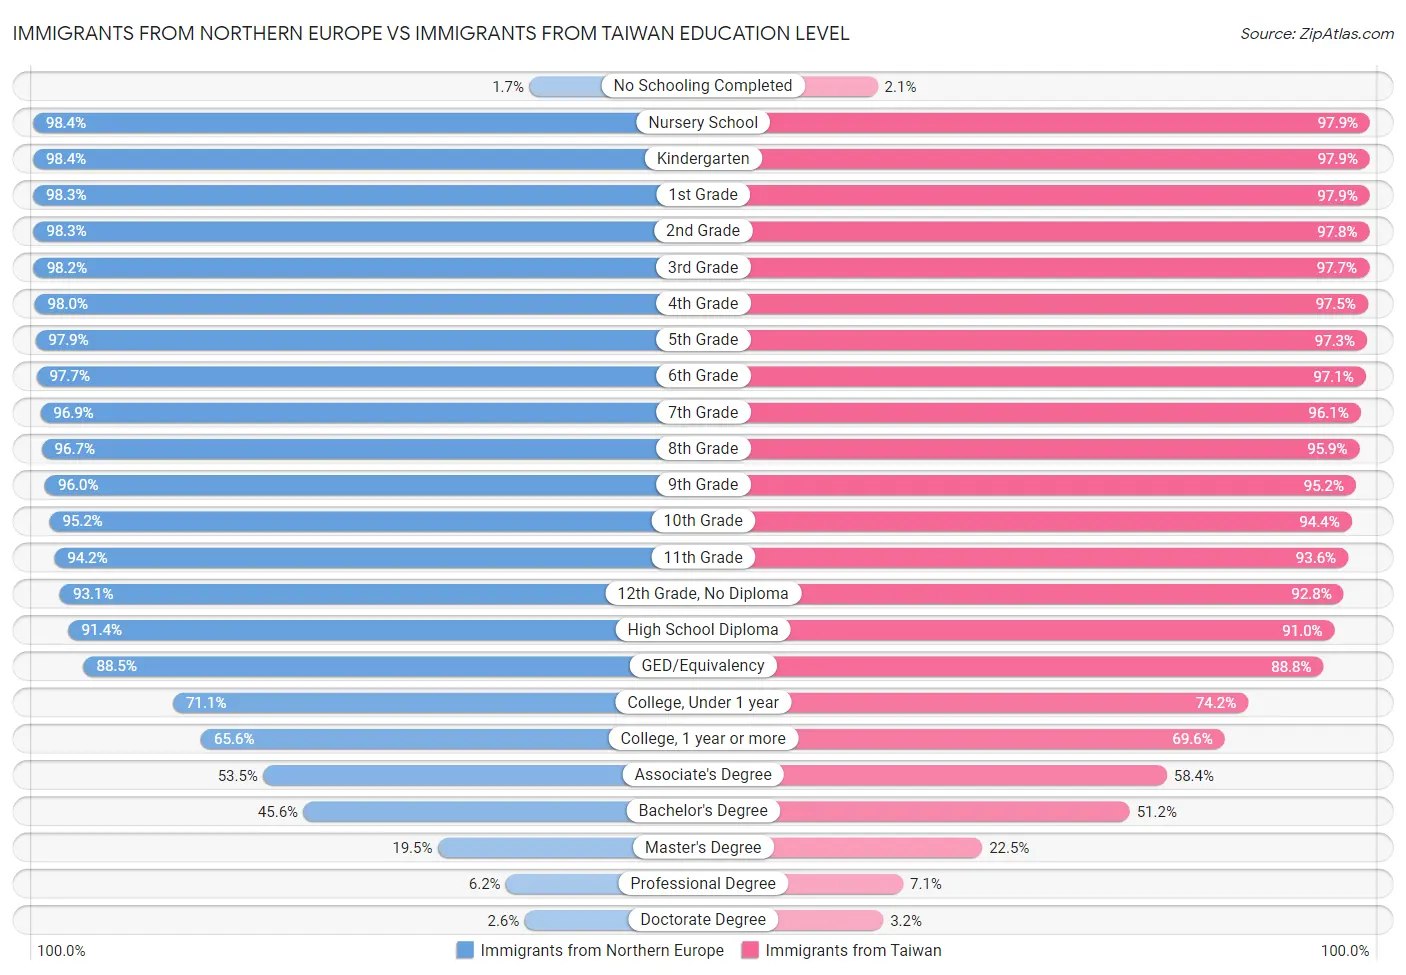 Immigrants from Northern Europe vs Immigrants from Taiwan Education Level